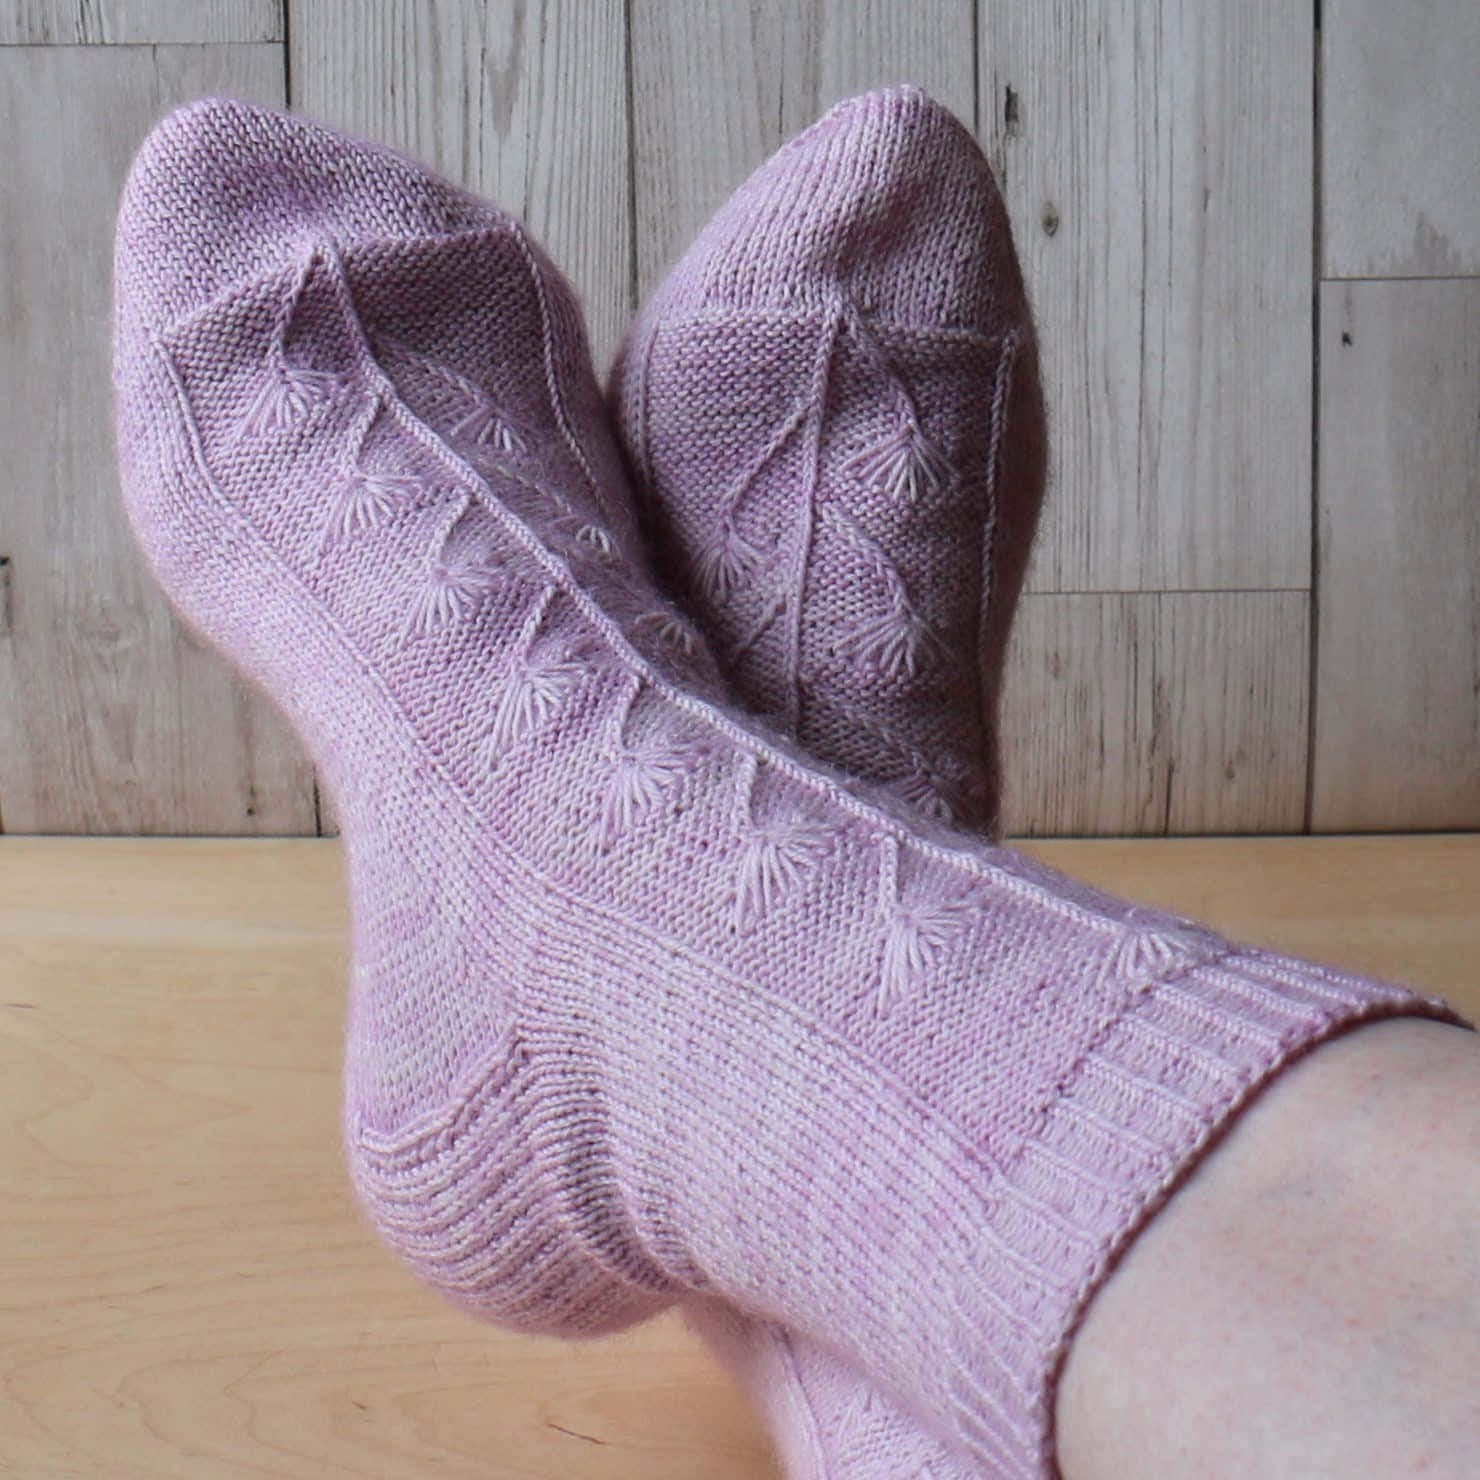 Stand out in Style with Purple Socks Wallpaper